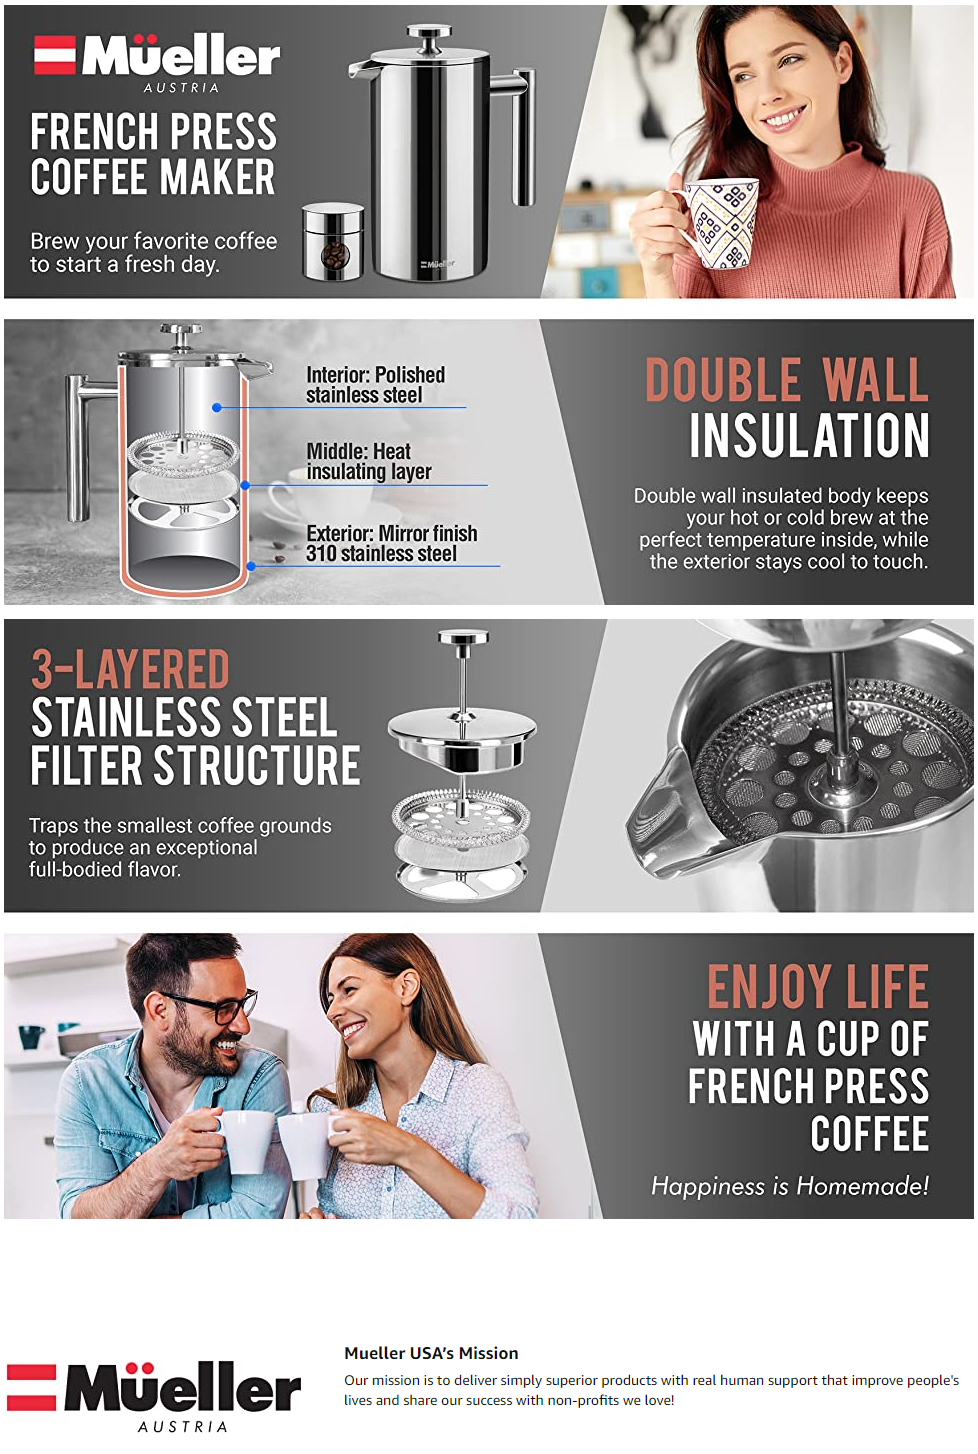 https://cdn.shopify.com/s/files/1/0563/8665/0299/files/FireShot_Capture_069_-_Amazon.com__Mueller_French_Press_Double_Insulated_304_Stainless_Steel__-_www.amazon.com.png?v=1635374015